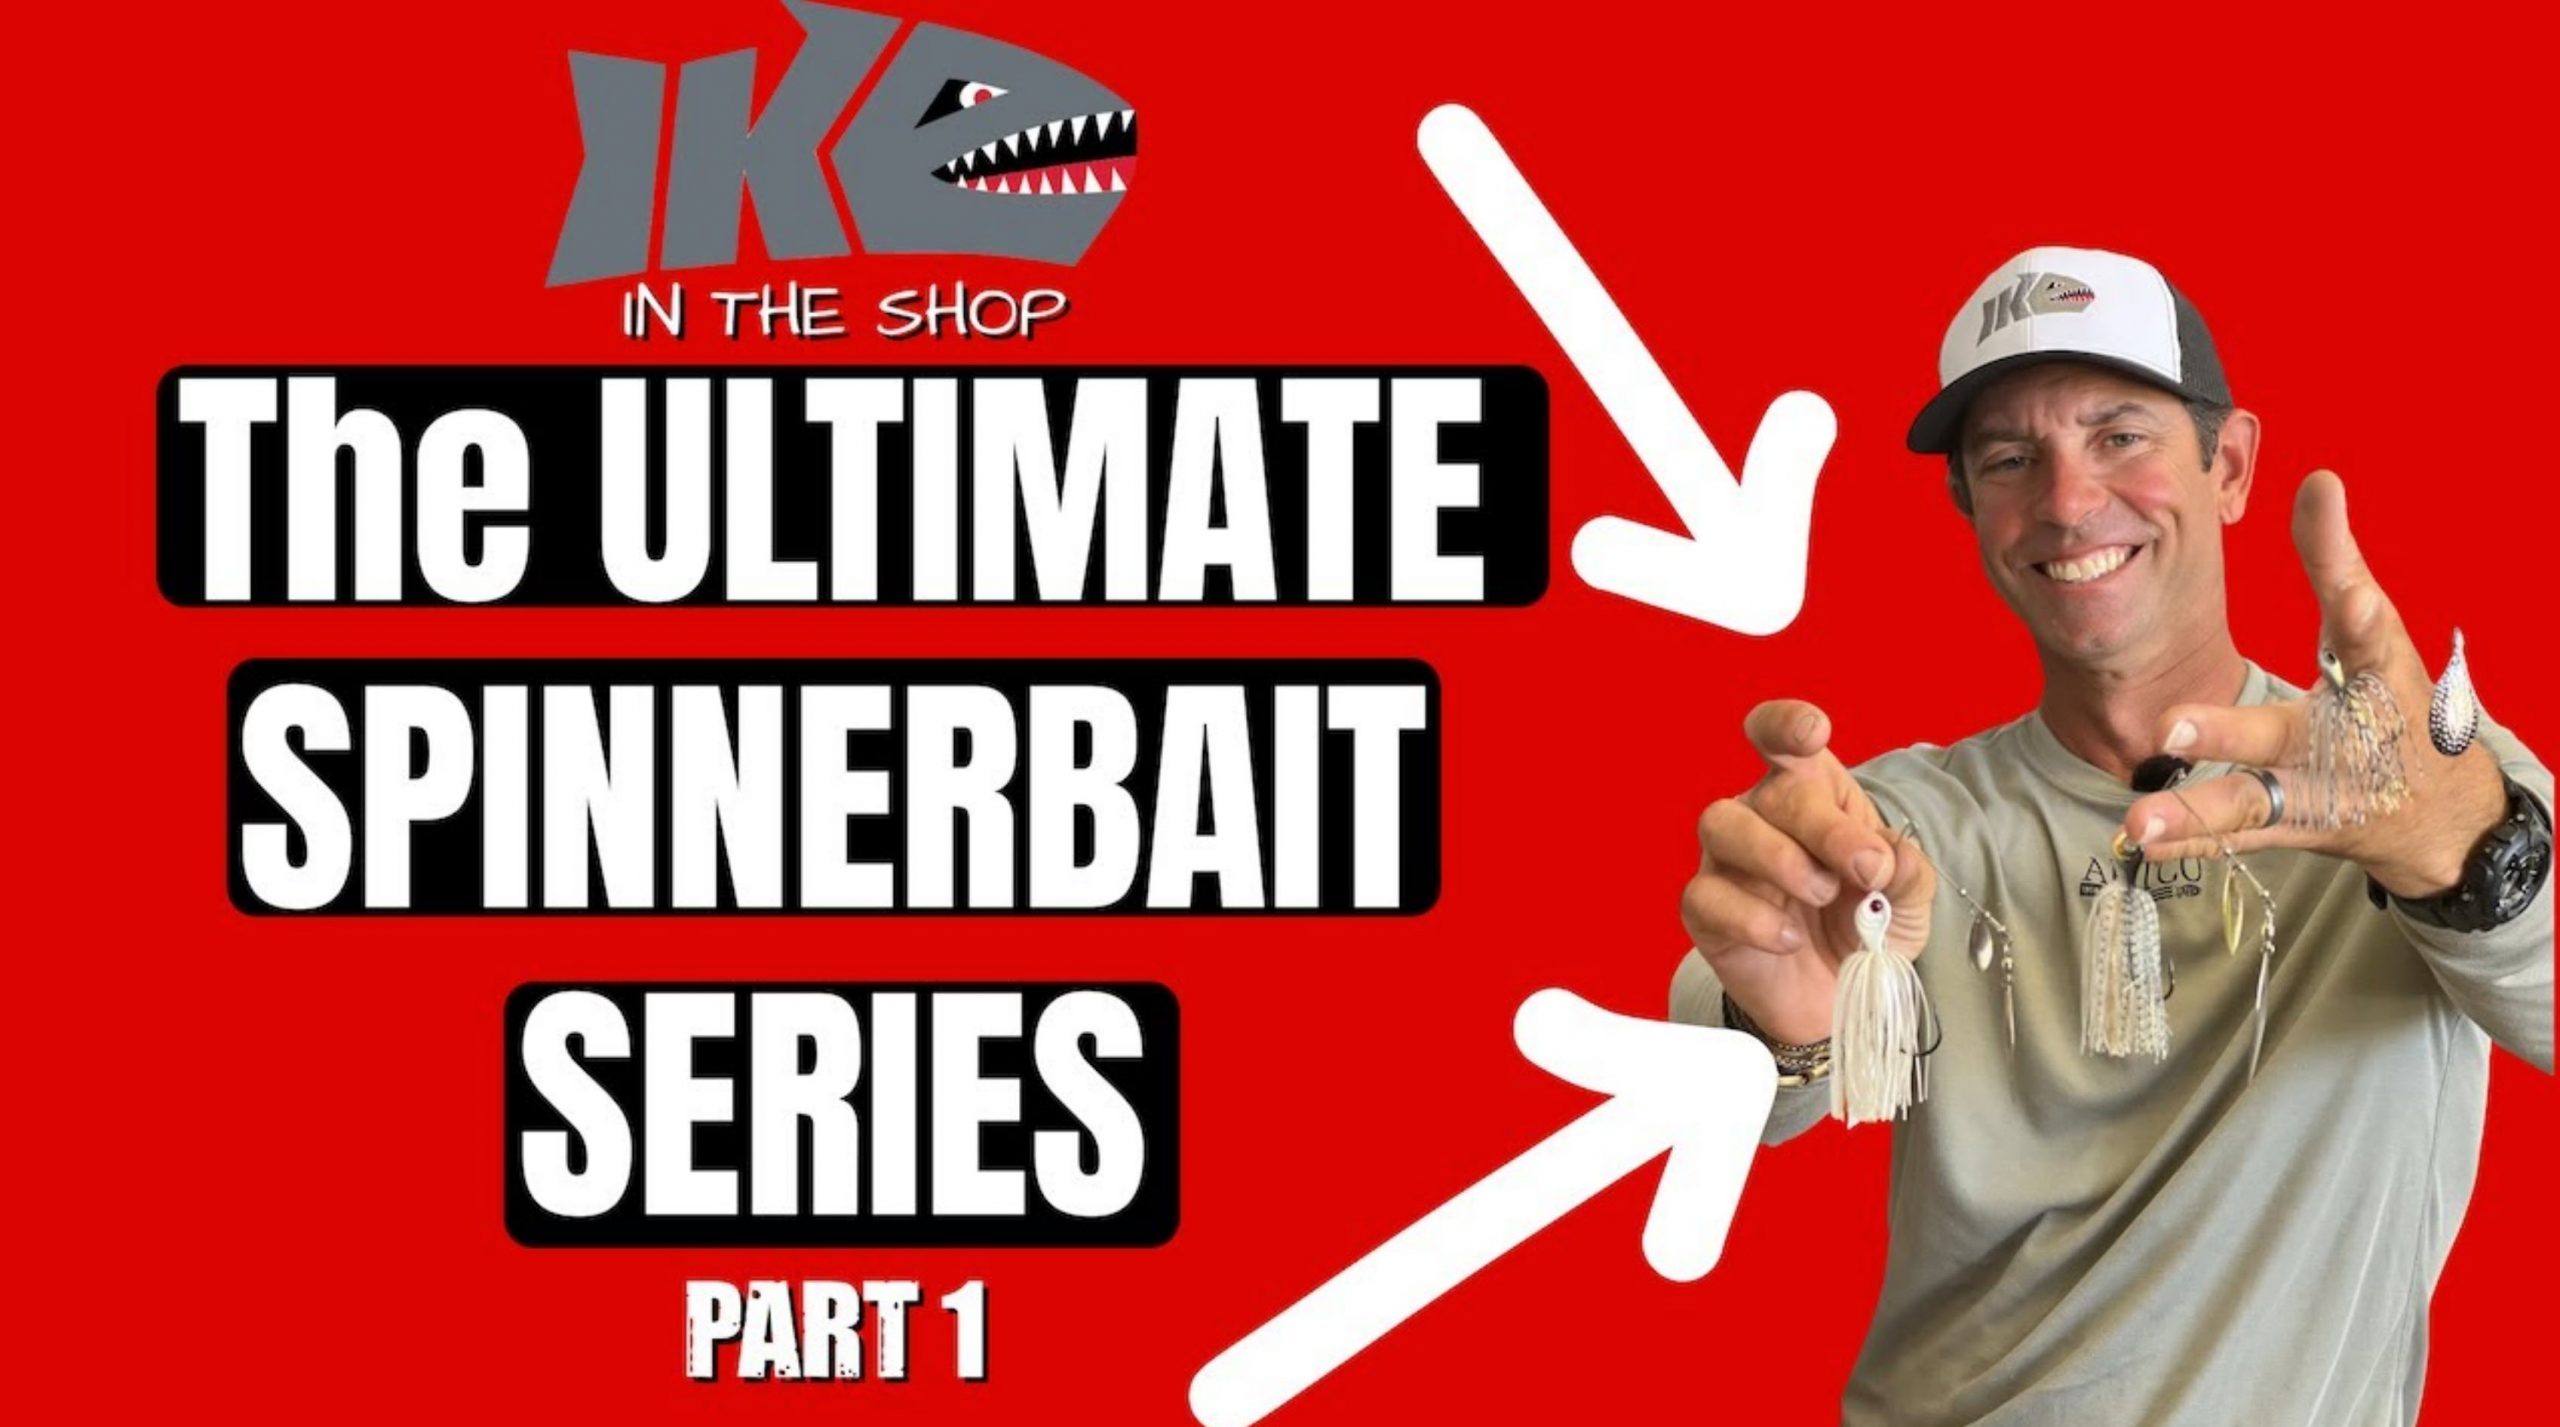 The Ultimate Spinnerbait series (Part 1)